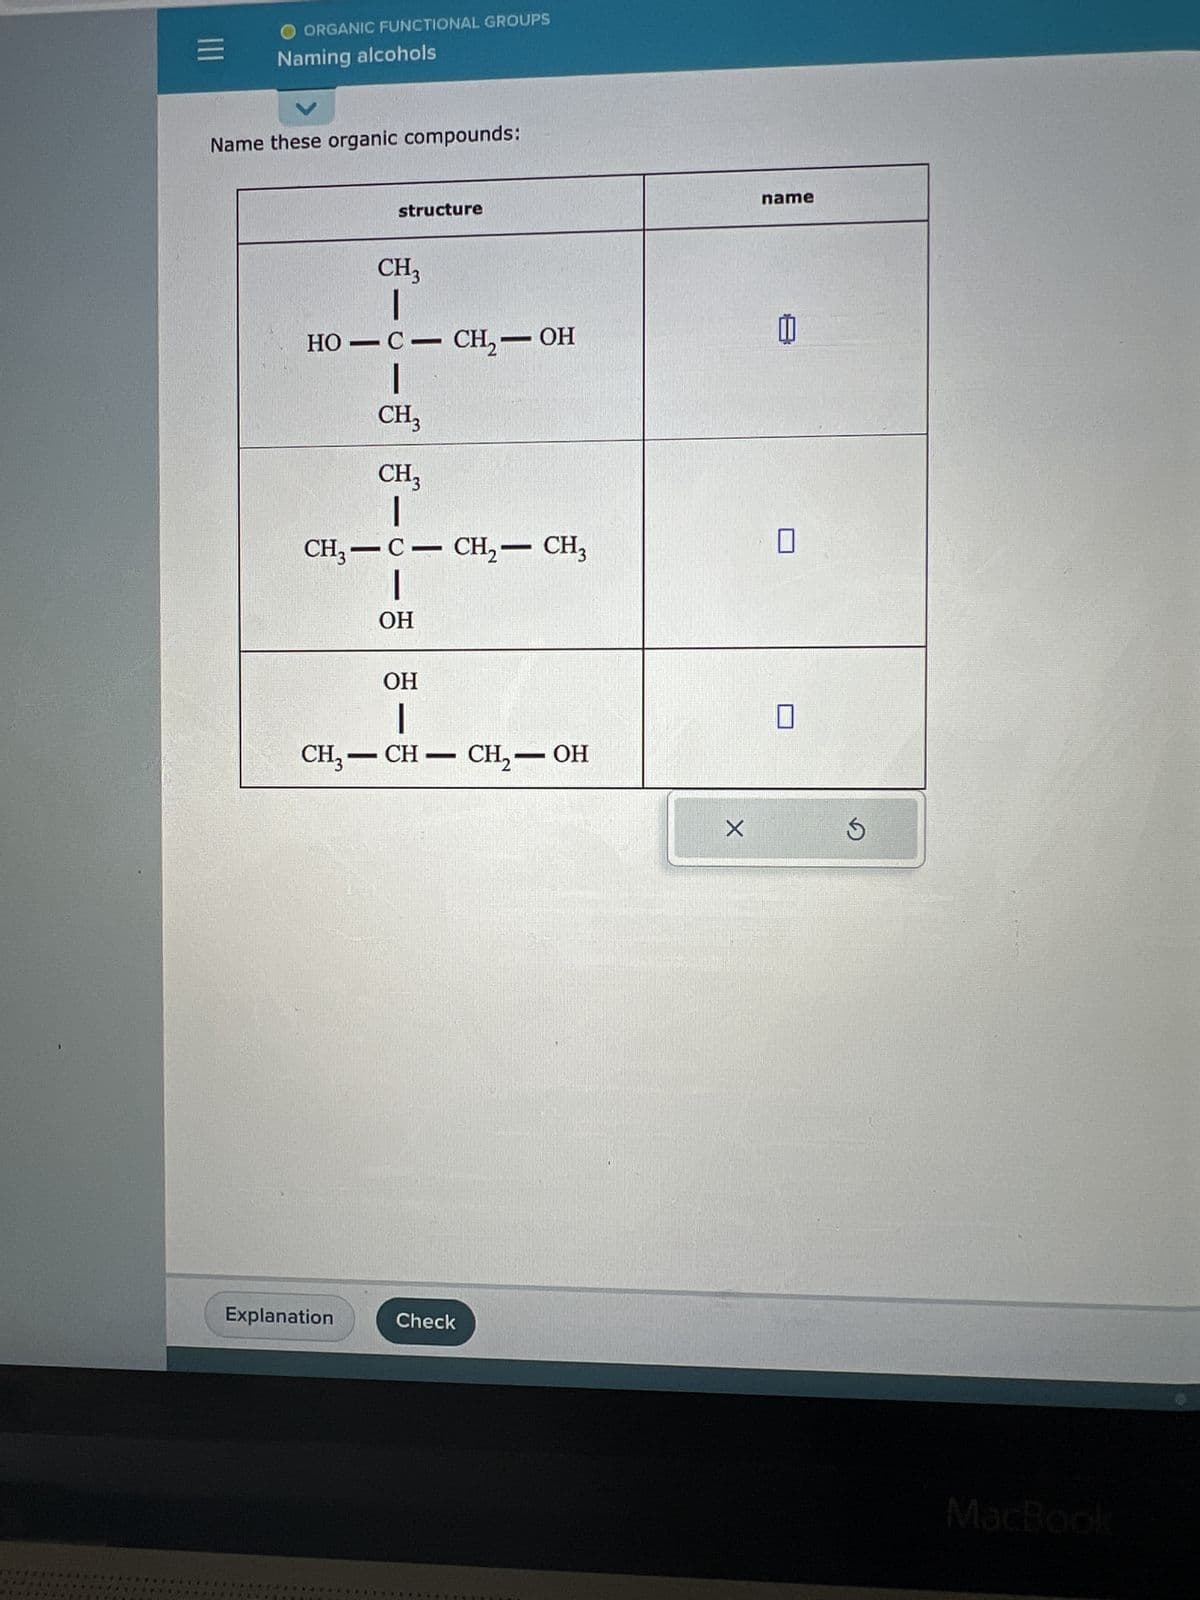 ORGANIC FUNCTIONAL GROUPS
*43.
Naming alcohols
Name these organic compounds:
structure
CH3
|
HO-C- CH₂ – OH
T
Explanation
CH3
CH3
|
CH3-C- CH₂ - CH3
|
OH
OH
-
CH3-CH-CH₂-OH
Check
X
name
[
MacBook